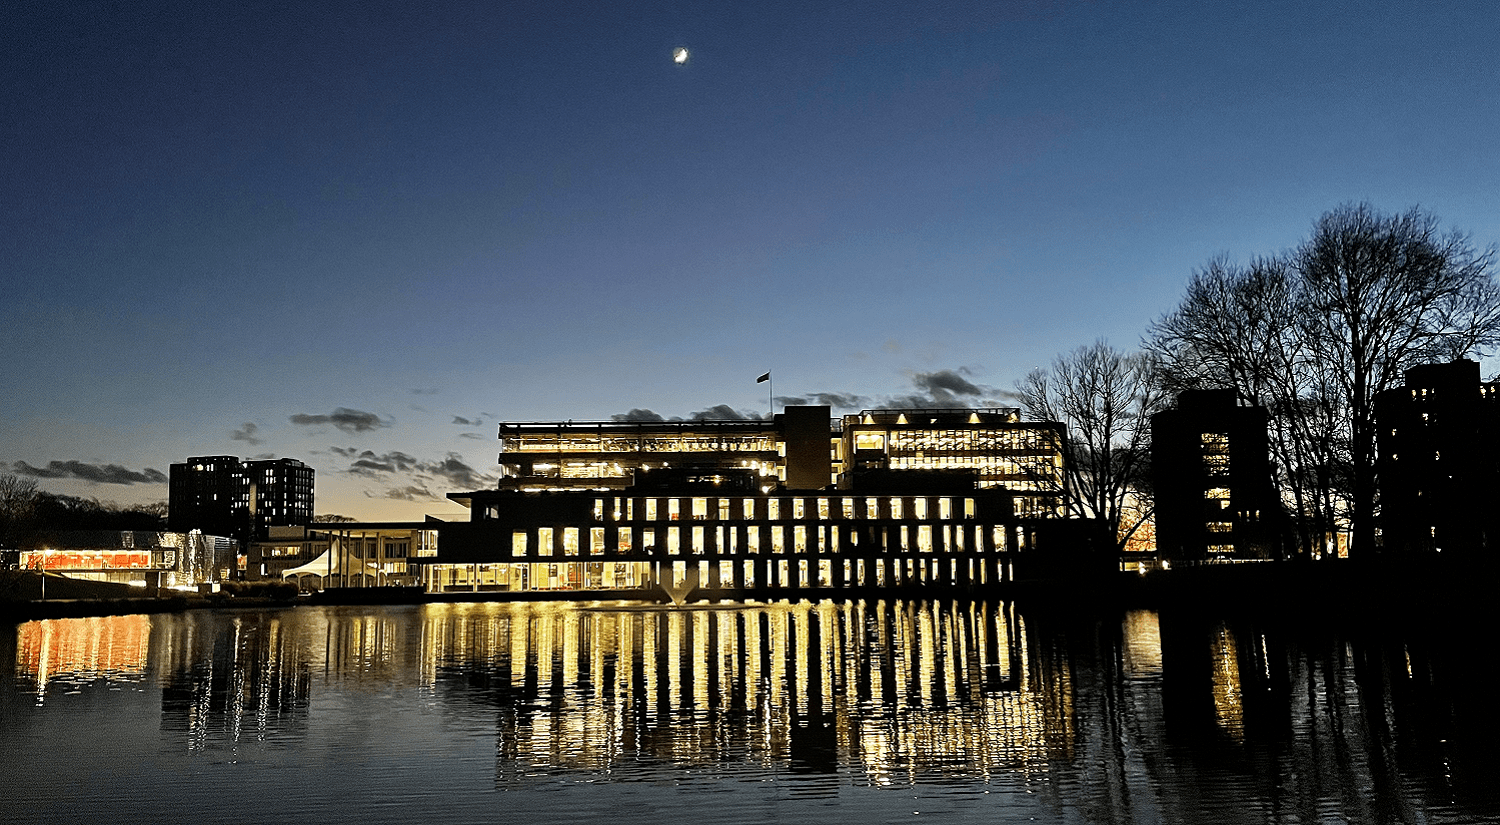 The Silberrad Centre lit up at night in front of the lake